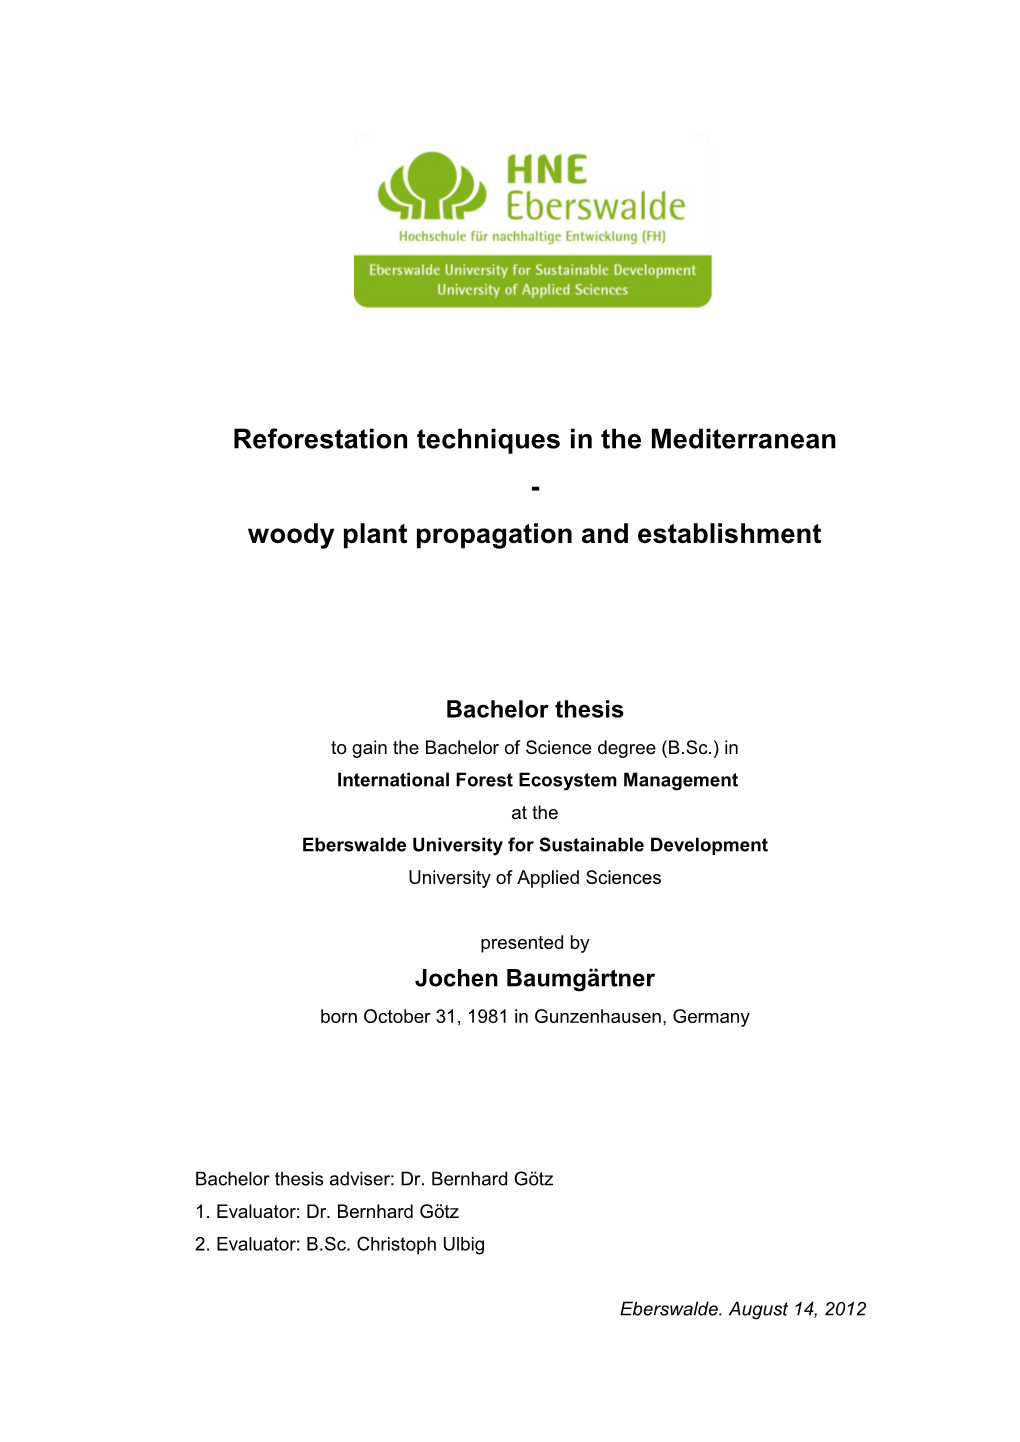 Reforestation Techniques in the Mediterranean - Woody Plant Propagation and Establishment